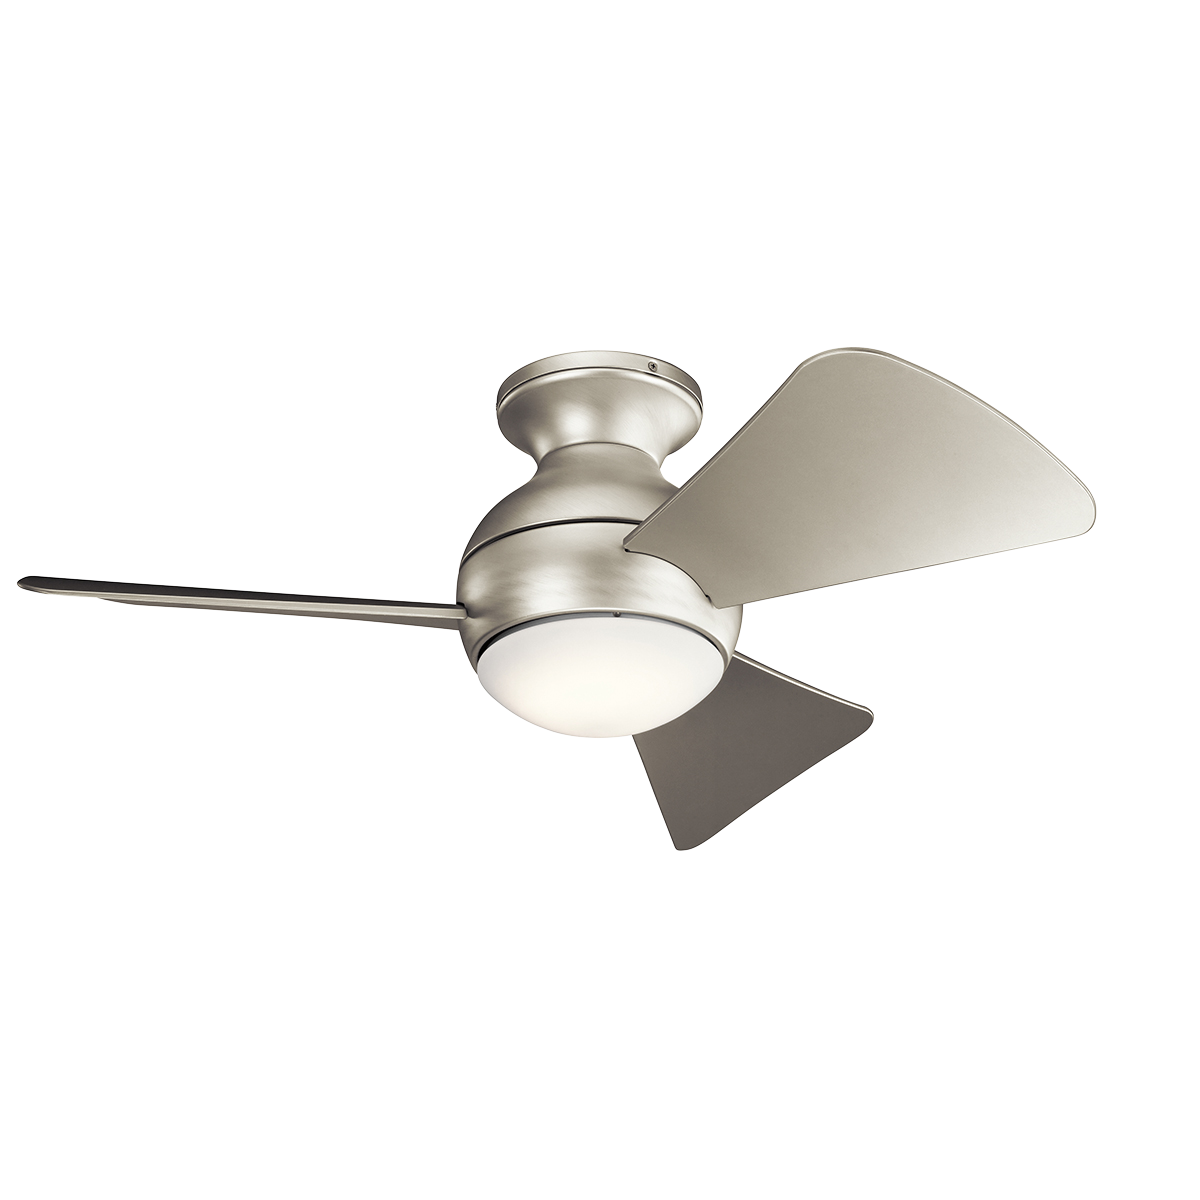 34 Inch Sola Fan in NI,in. This Brushed Nickel 34 inch ceiling fan from the Sola collection which can be used in wet locations, features integrated LED lighting and flush mount installation.  The globe inspired motor housing shape brings delightful style to any space.  A metal fixture cap is included for non light use installations.